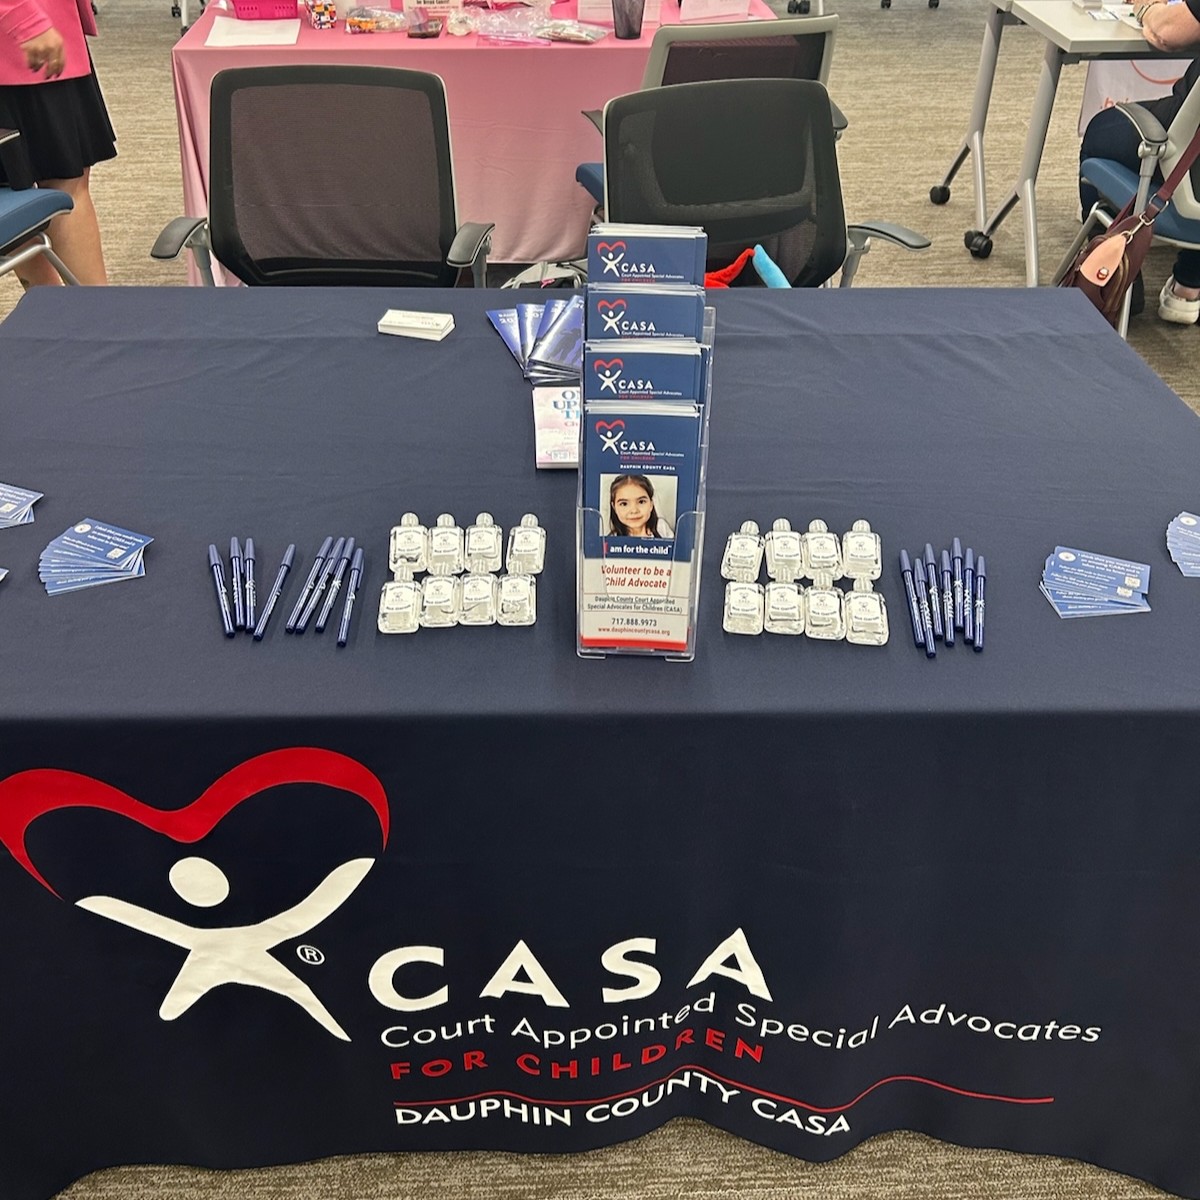 We are at the Central PA Volunteer Fair, sponsored by Leadership Harrisburg Area from 4pm to 7:30pm! Come visit us at the Commonwealth Charter Academy in Harrisburg 🤩 #nonprofit #harrisburg #casa #pennsylvania #dauphincounty